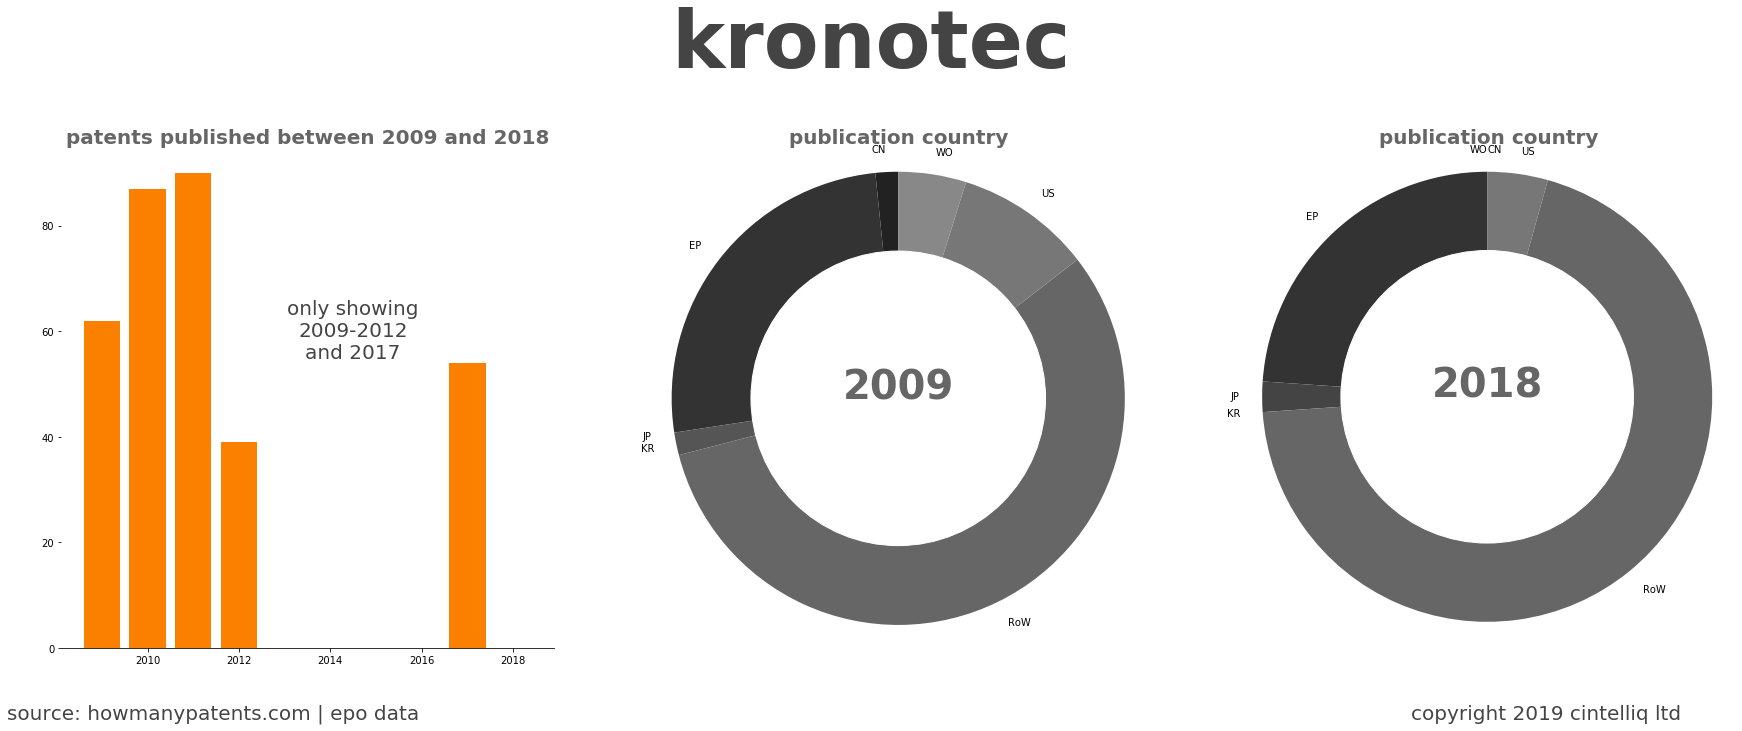 summary of patents for Kronotec